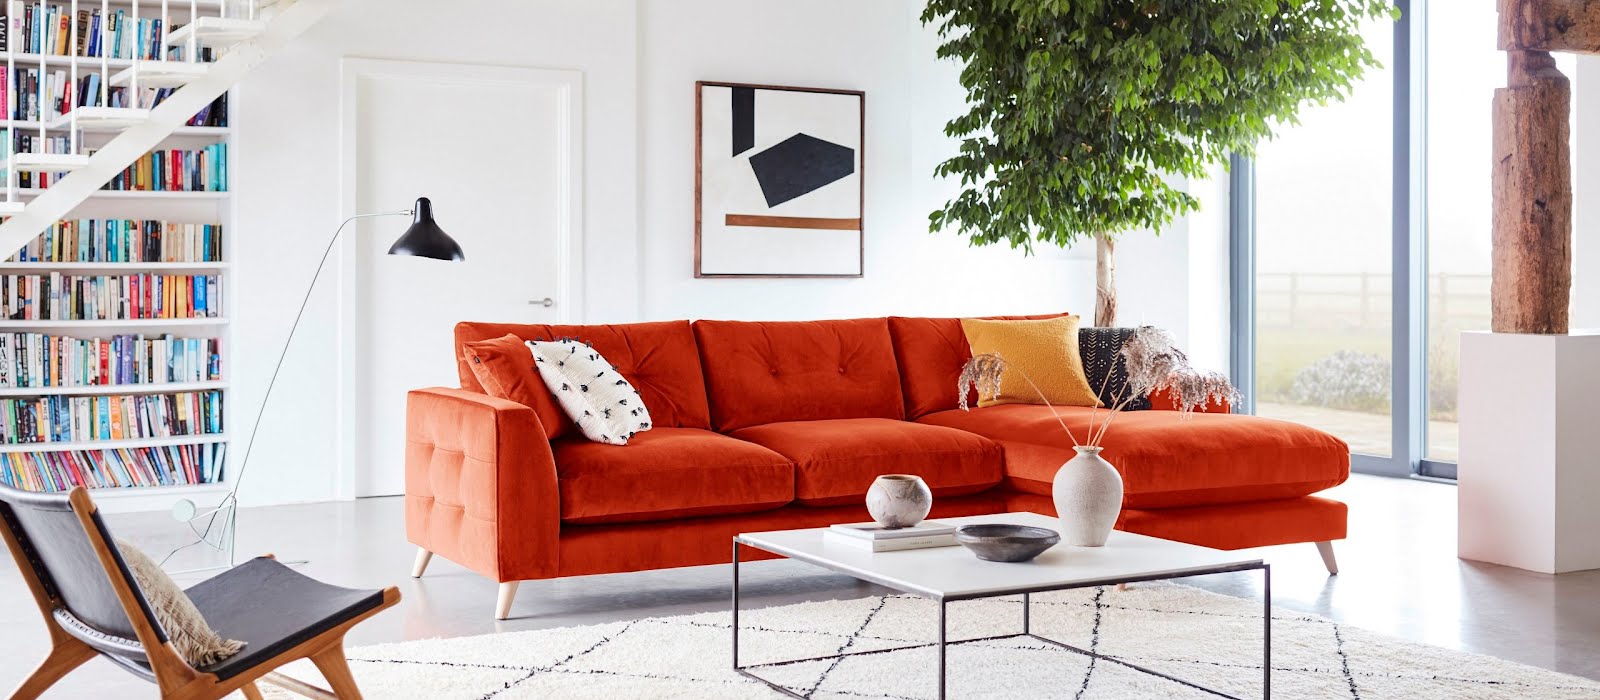 Thinking about a new sofa? Here are our favourites to suit every space